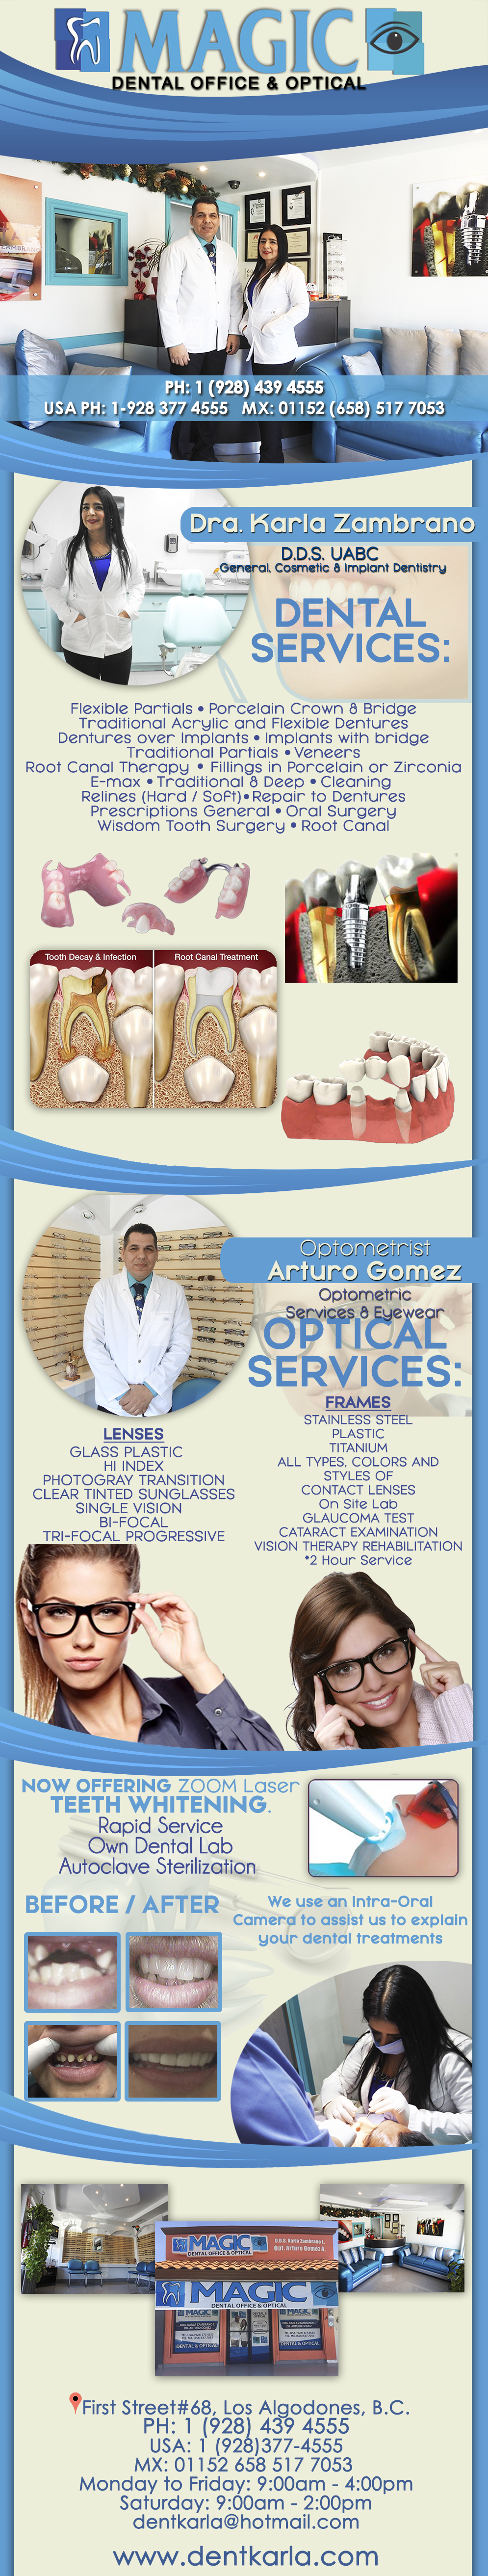 MAGIC Dental Office & Optical   Dra. Karla Zambrano DDS    Arturo G. Optometrist in Algodones  in Algodones  DENTAL SERVICES: Flexible Partials Porcelain Crown & Bridge Traditional Acrylic and Flexible Dentures Dentures over Implants Implants with bridge Traditional Partials Veneers Root Canal Therapy  Fillings in Porcelain or Zirconia E-max Traditional & Deep Cleaning Relines (Hard  Soft) Repair to Dentures Prescriptions General Oral Surgery Wisdom Tooth Surger OPTICAL SERVICES.- Lenses: GlassÂ Â PlasticÂ Â Â  
Hi Index PhotograyÂ  Transition ClearÂ Â  TintedÂ  Sunglasses Single VisionÂ Â Bi-focal
Tri-focalÂ Â Progressive      Frames: Stainless Steel Plastic Titanium
All types, Colors and Styles of Contact Lenses. On site lab, Glaucoma Test, Cataract Examination, Vision Therapy Rehabilitation
*2 hour service                  DENTAL SERVICES: Flexible Partials Porcelain Crown & Bridge Traditional Acrylic and Flexible Dentures Dentures over Implants Implants with bridge Traditional Partials Veneers Root Canal Therapy  Fillings in Porcelain or Zirconia E-max Traditional & Deep Cleaning Relines (Hard  Soft) Repair to Dentures Prescriptions General Oral Surgery Wisdom Tooth Surger OPTICAL SERVICES.- Lenses: Glass  Plastic    
Hi Index Photogray  Transition Clear   Tinted  Sunglasses Single Vision  Bi-focal
Tri-focal  Progressive      Frames: Stainless Steel Plastic Titanium
All types, Colors and Styles of Contact Lenses. On site lab, Glaucoma Test, Cataract Examination, Vision Therapy Rehabilitation
*2 hour service                 